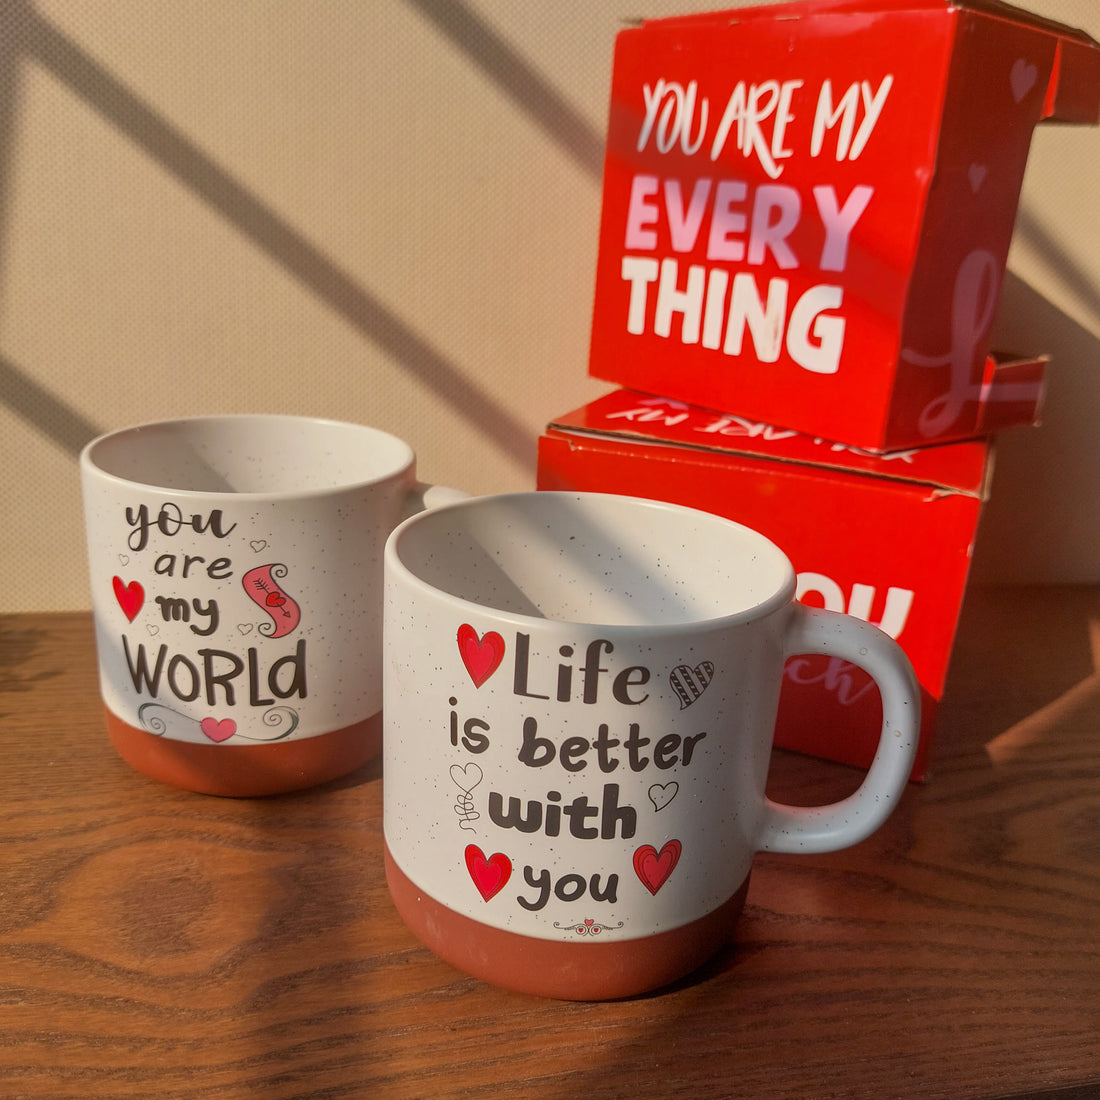 Life Is Better With You Ceramic Mug - 1 pc